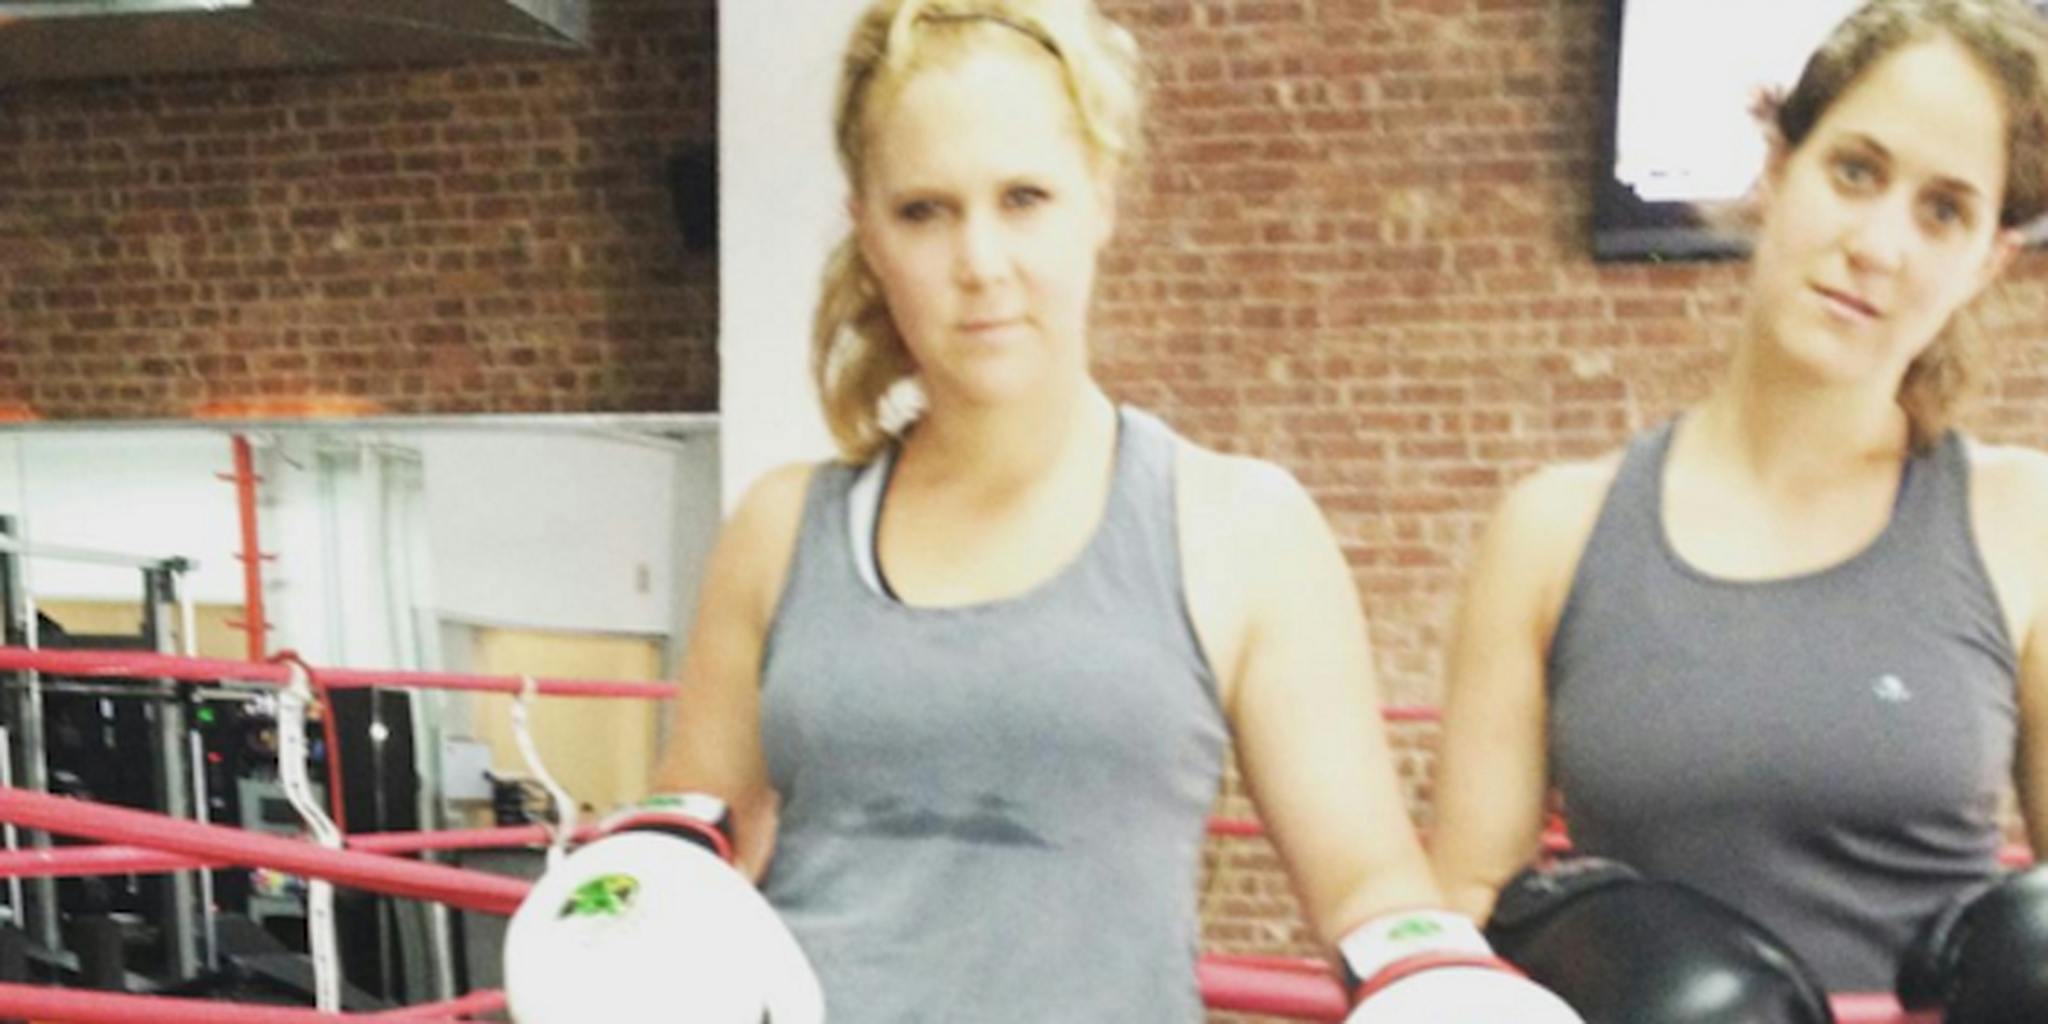 Amy Schumer’s new topless portrait has an important message